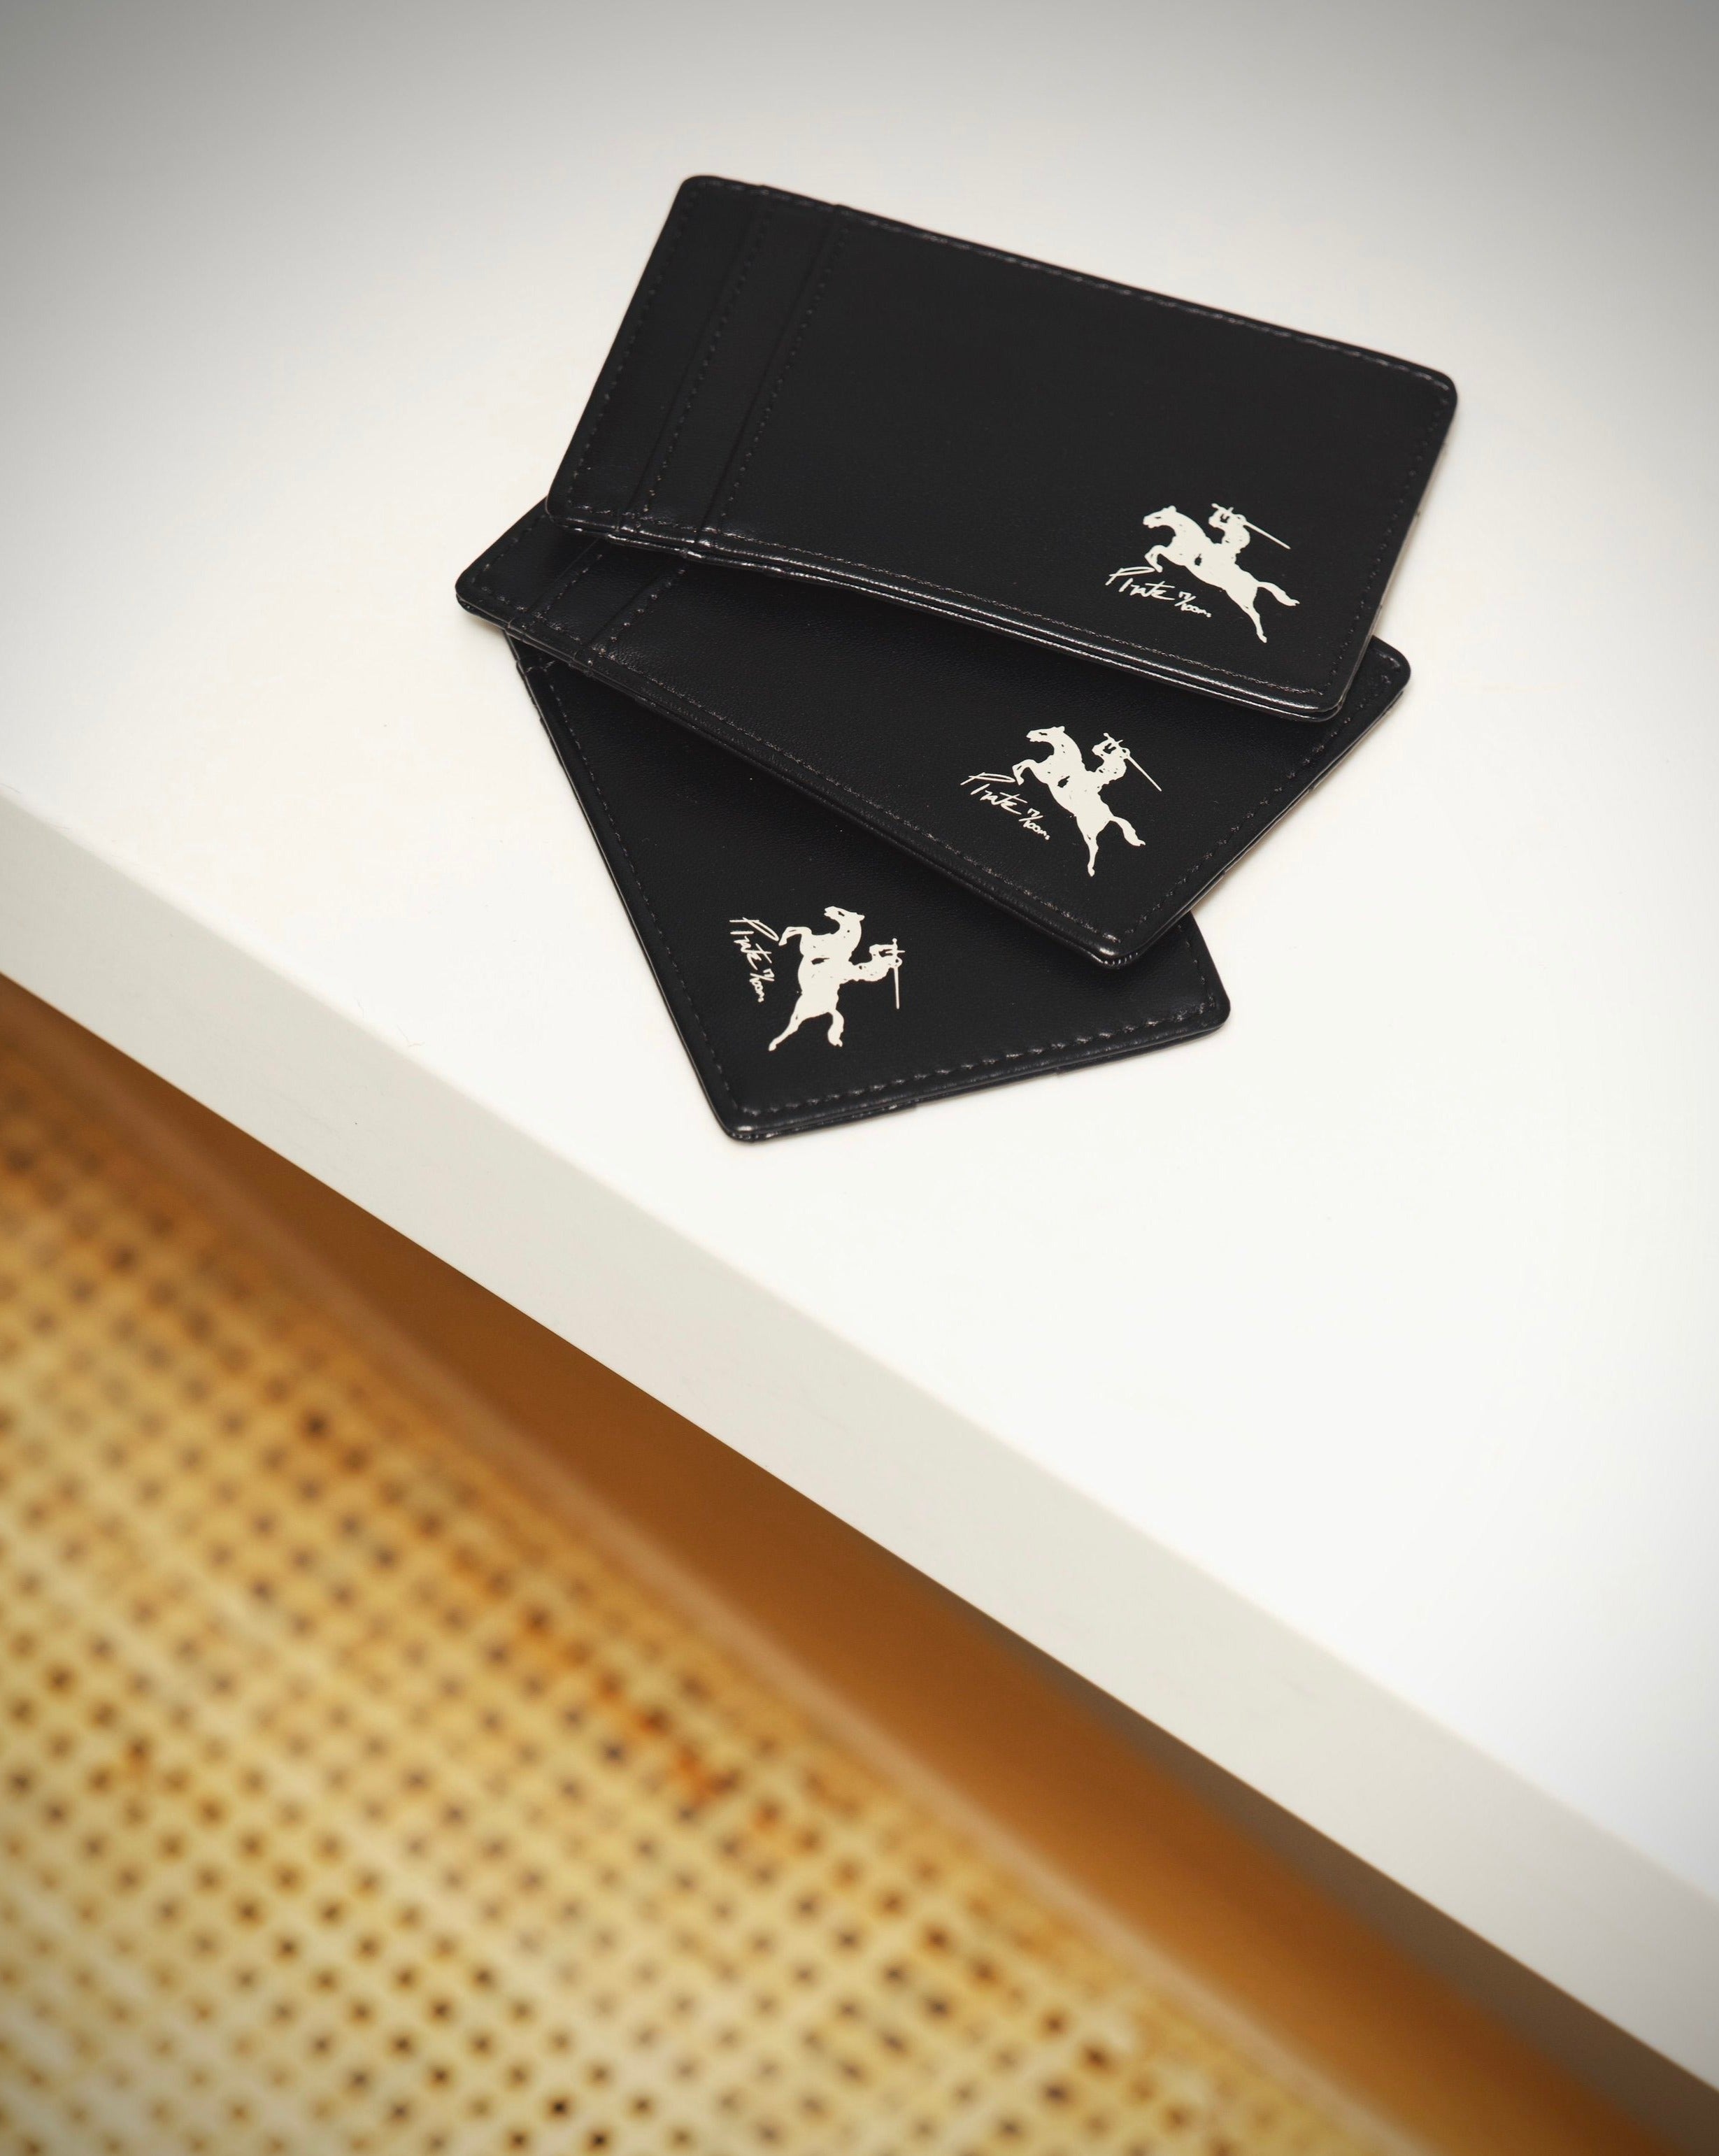 Pirate "By Any Means" Leather Card Holder